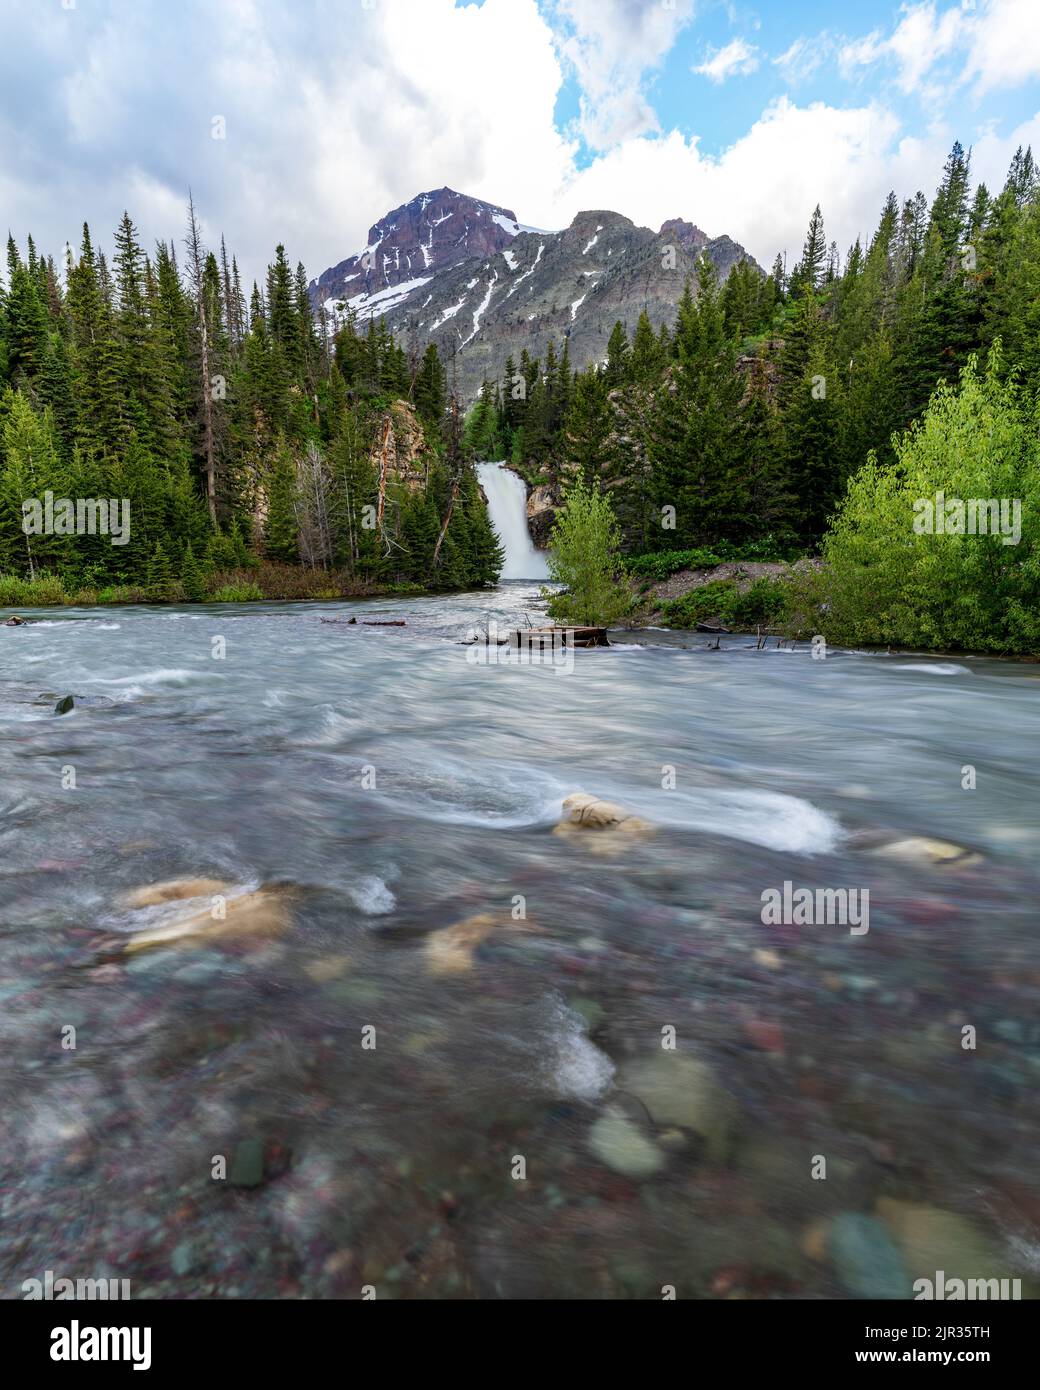 Glacier Montana waterfall with river flowing by Stock Photo